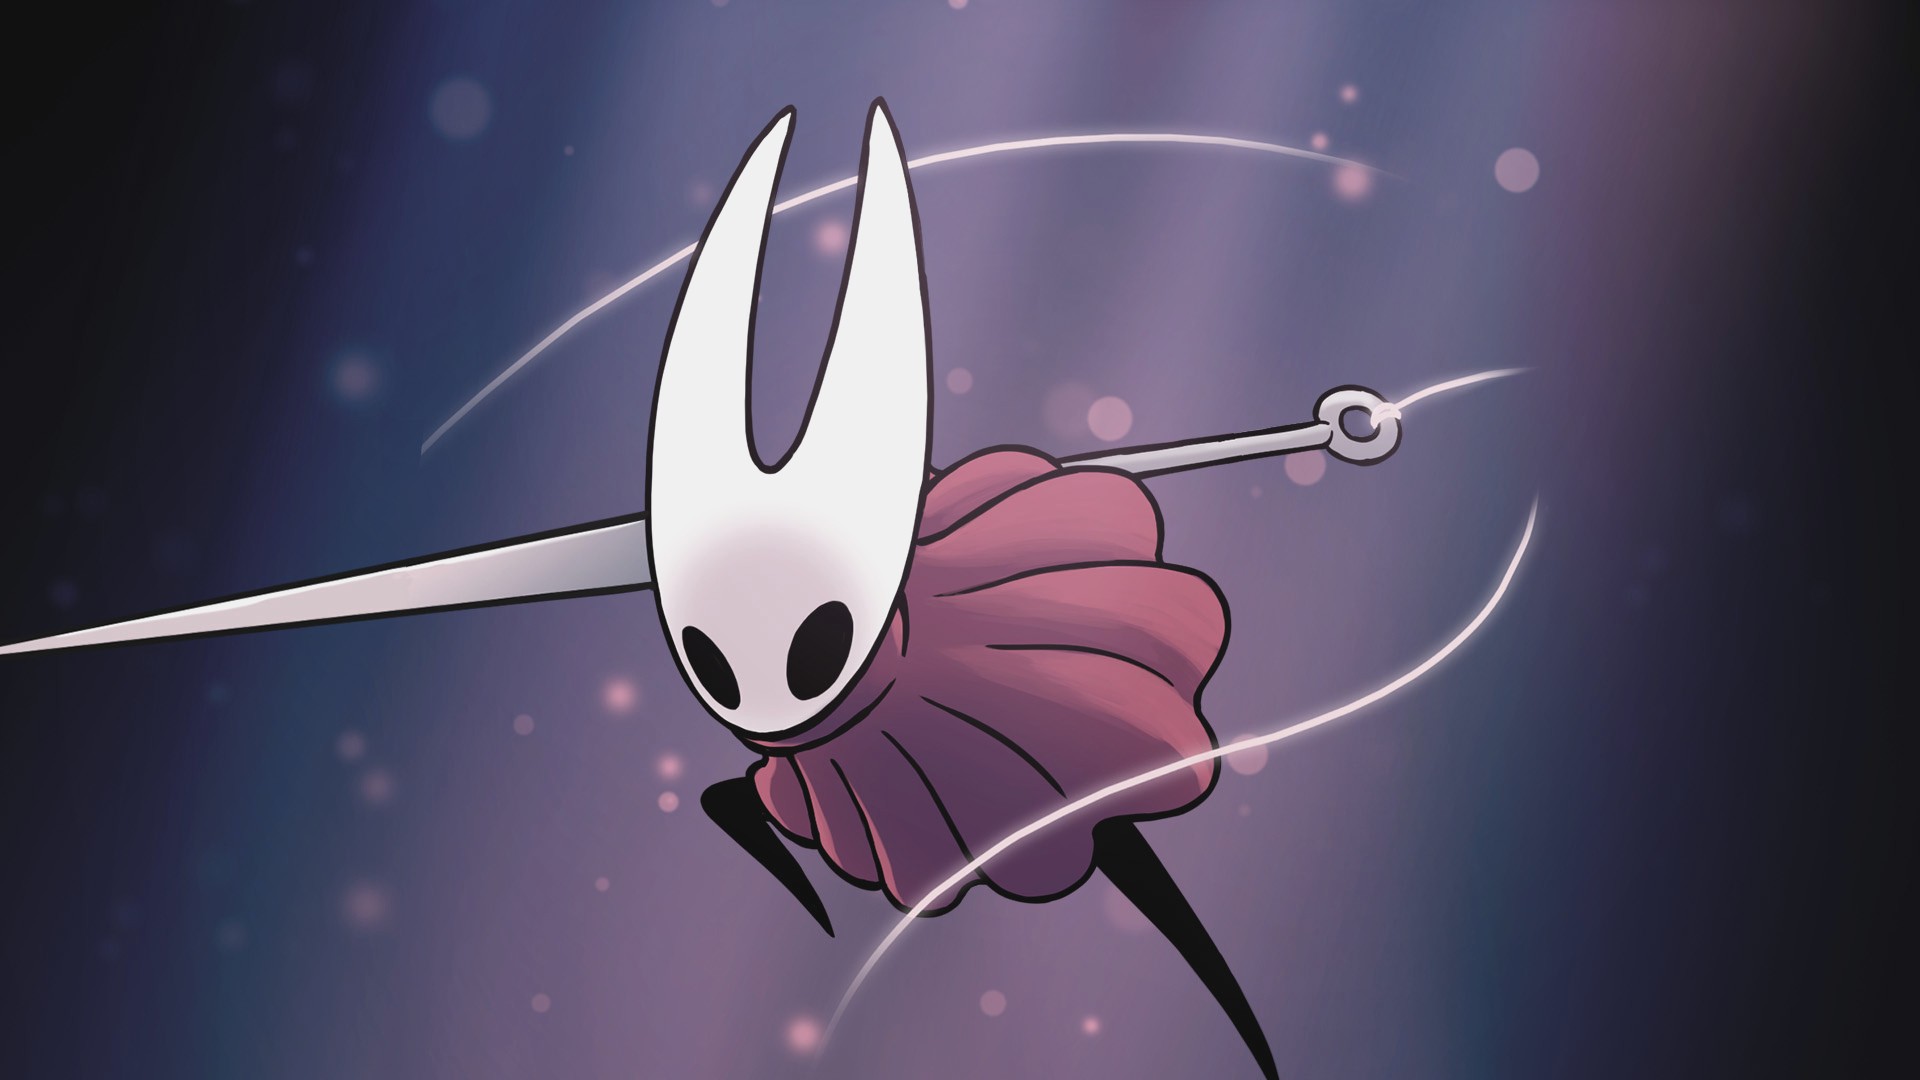 Wallpapers Computer Hollow Knight Gameplay With high-resolution 1920X1080 pixel. You can use this wallpaper for your Desktop Computer Backgrounds, Mac Wallpapers, Android Lock screen or iPhone Screensavers and another smartphone device